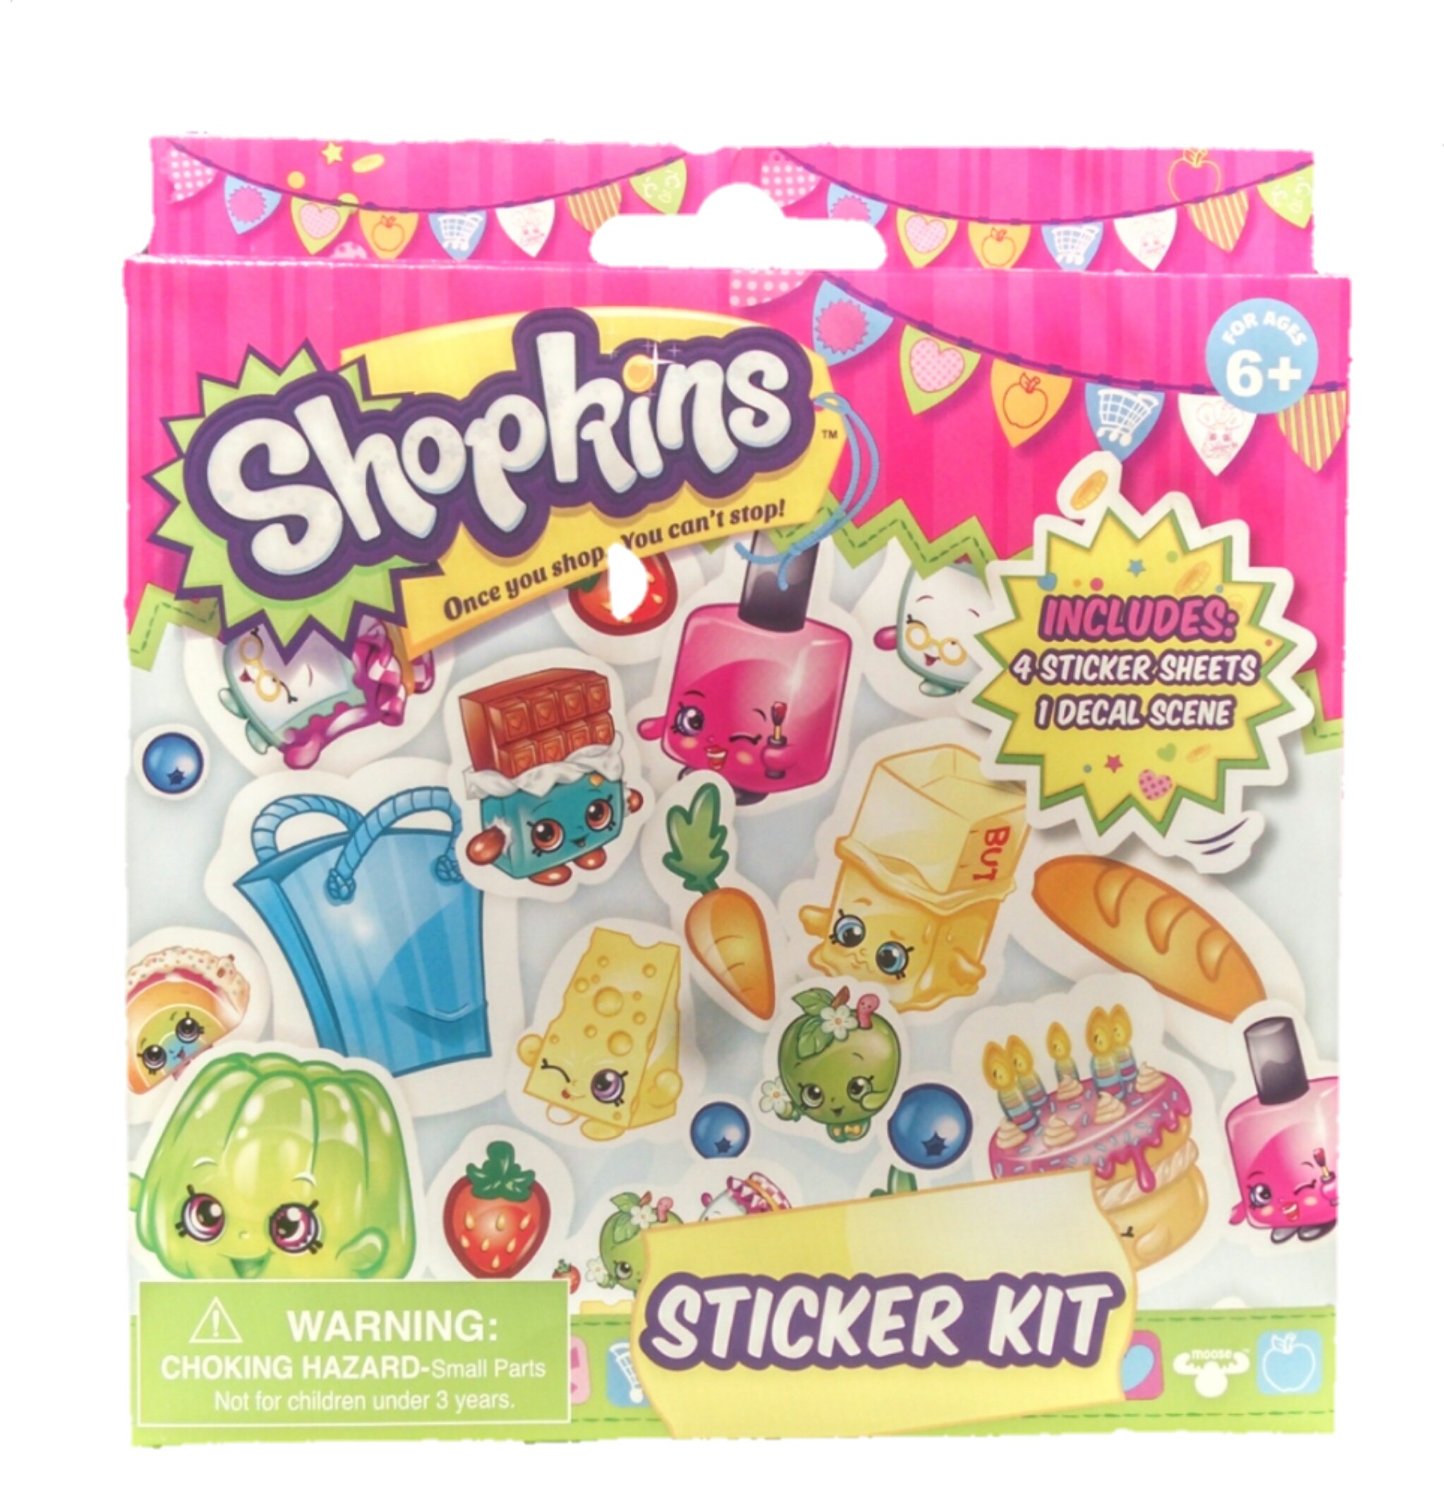 Shopkins Boxed Sticker Activity Kit Only $7.24 – 64% Savings!